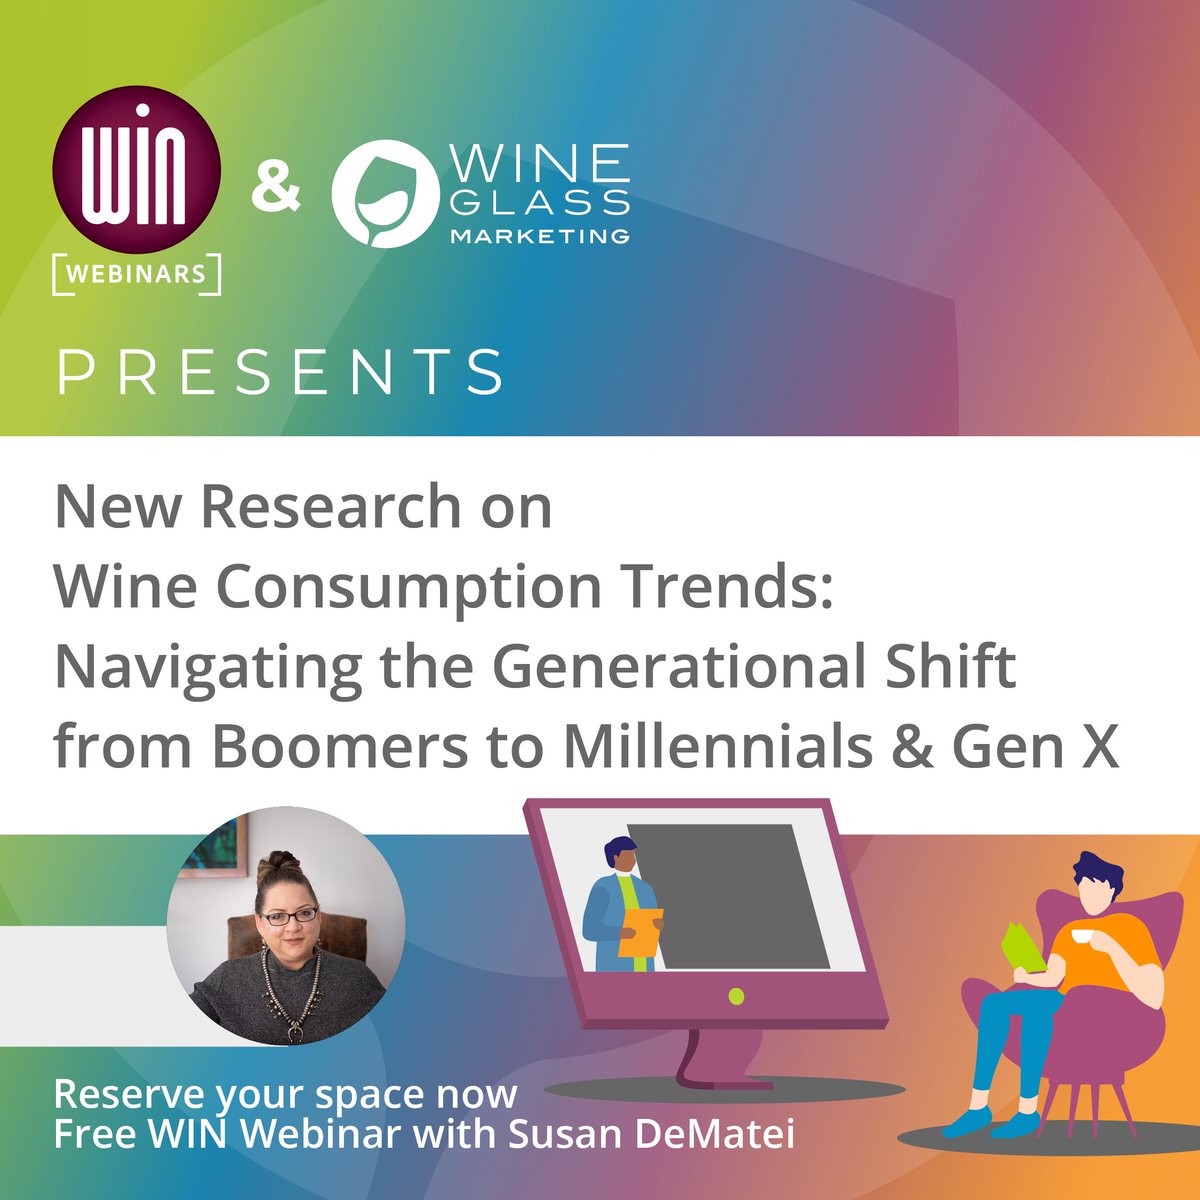 We had questions, so WGM hired a research firm and asked consumers, 'What the heck do you want from a winery?' Join us April 25th for this free webinar on new research into wine consumption habits and attitudes for the answers: bit.ly/3TYFn8f